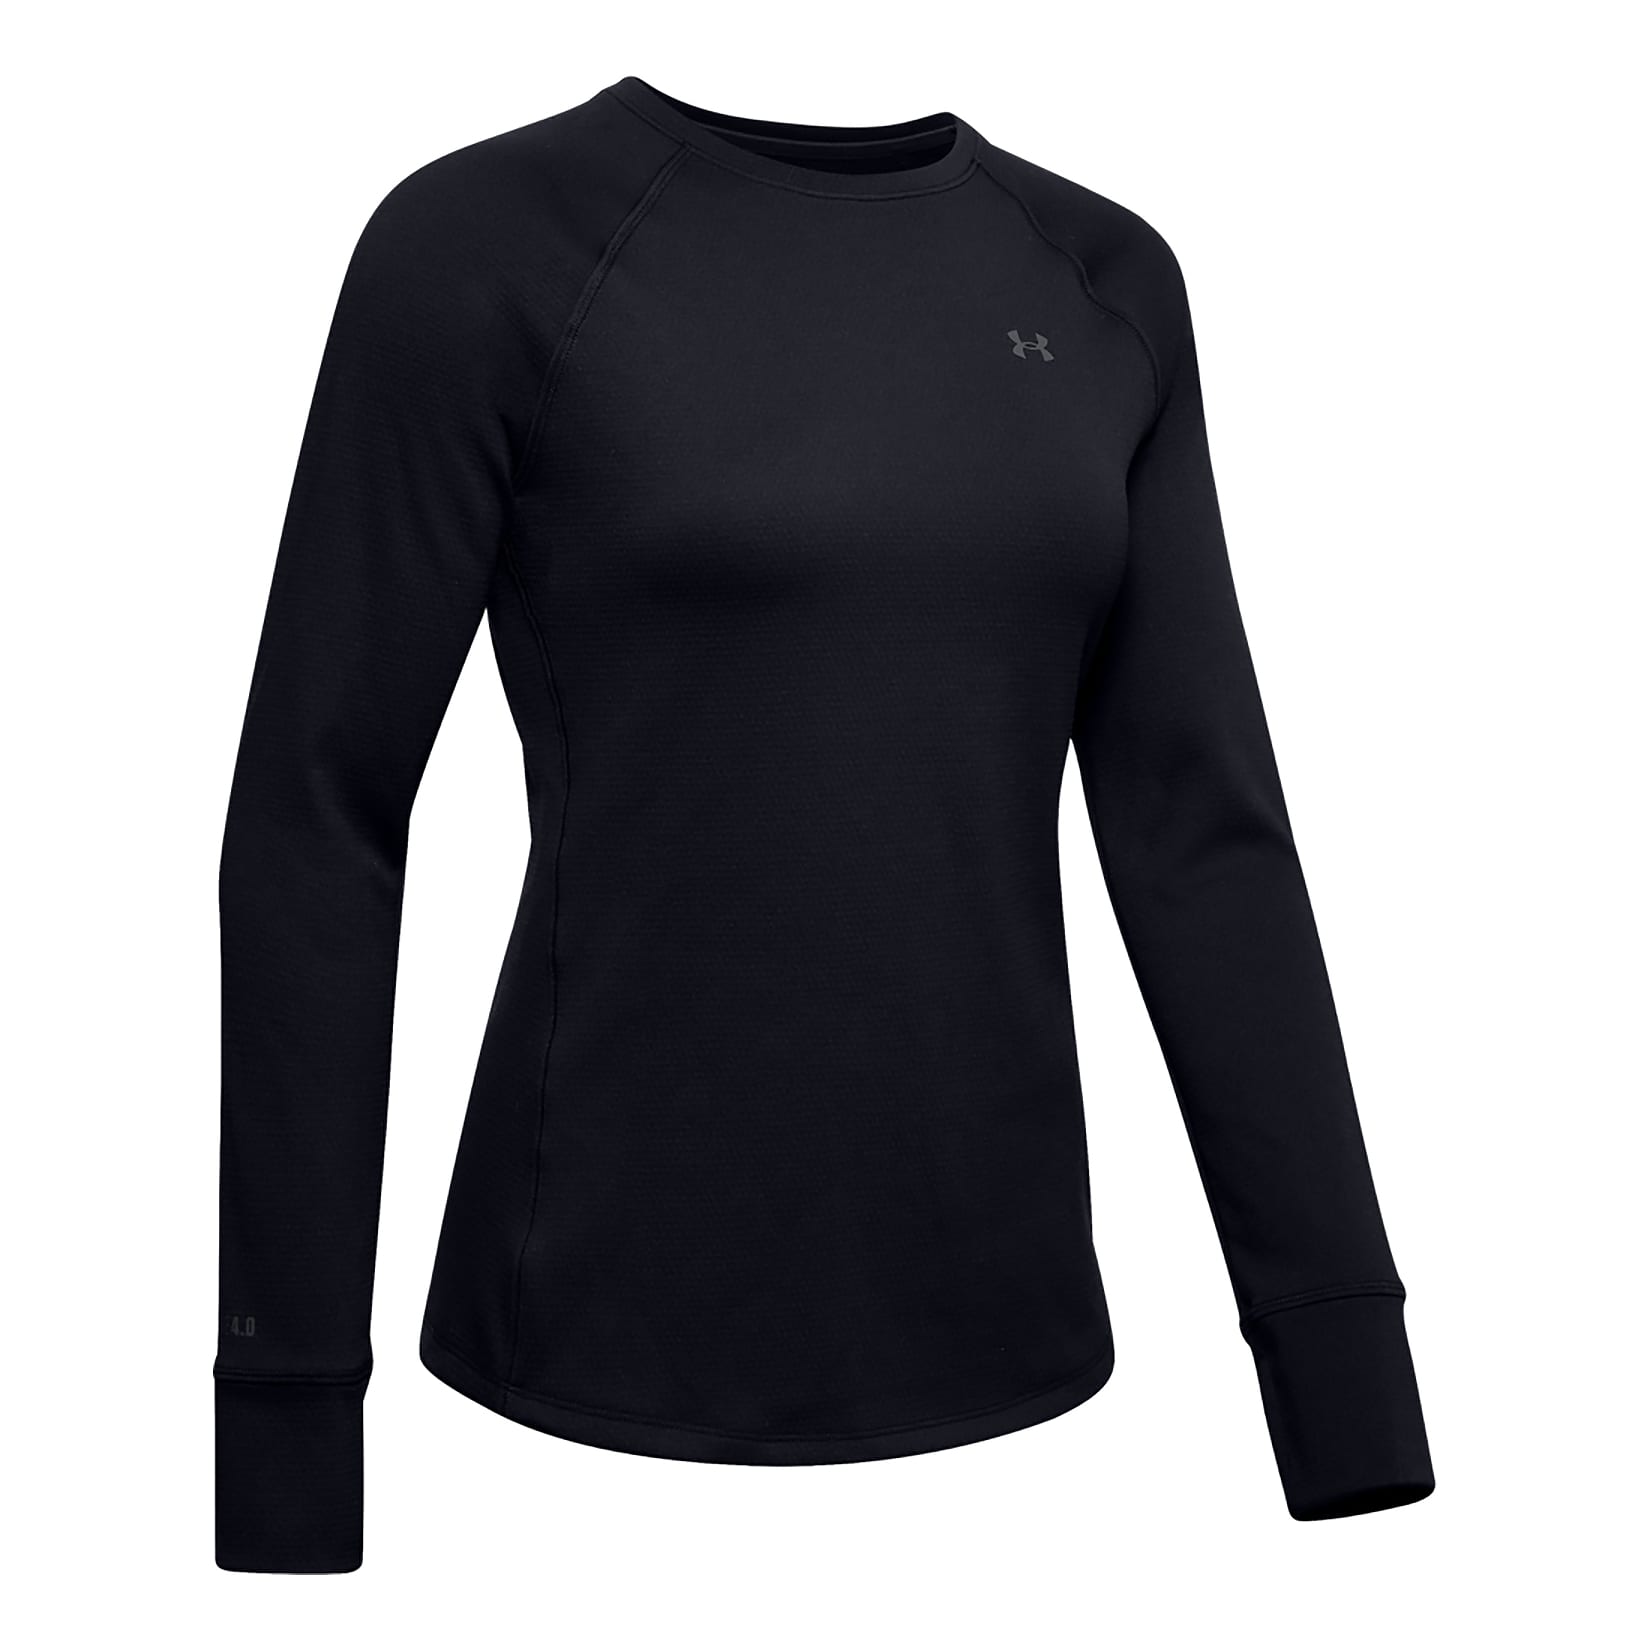 Under Armour Women's ColdGear Base 4.0 Crew Extreme Baselayer - My